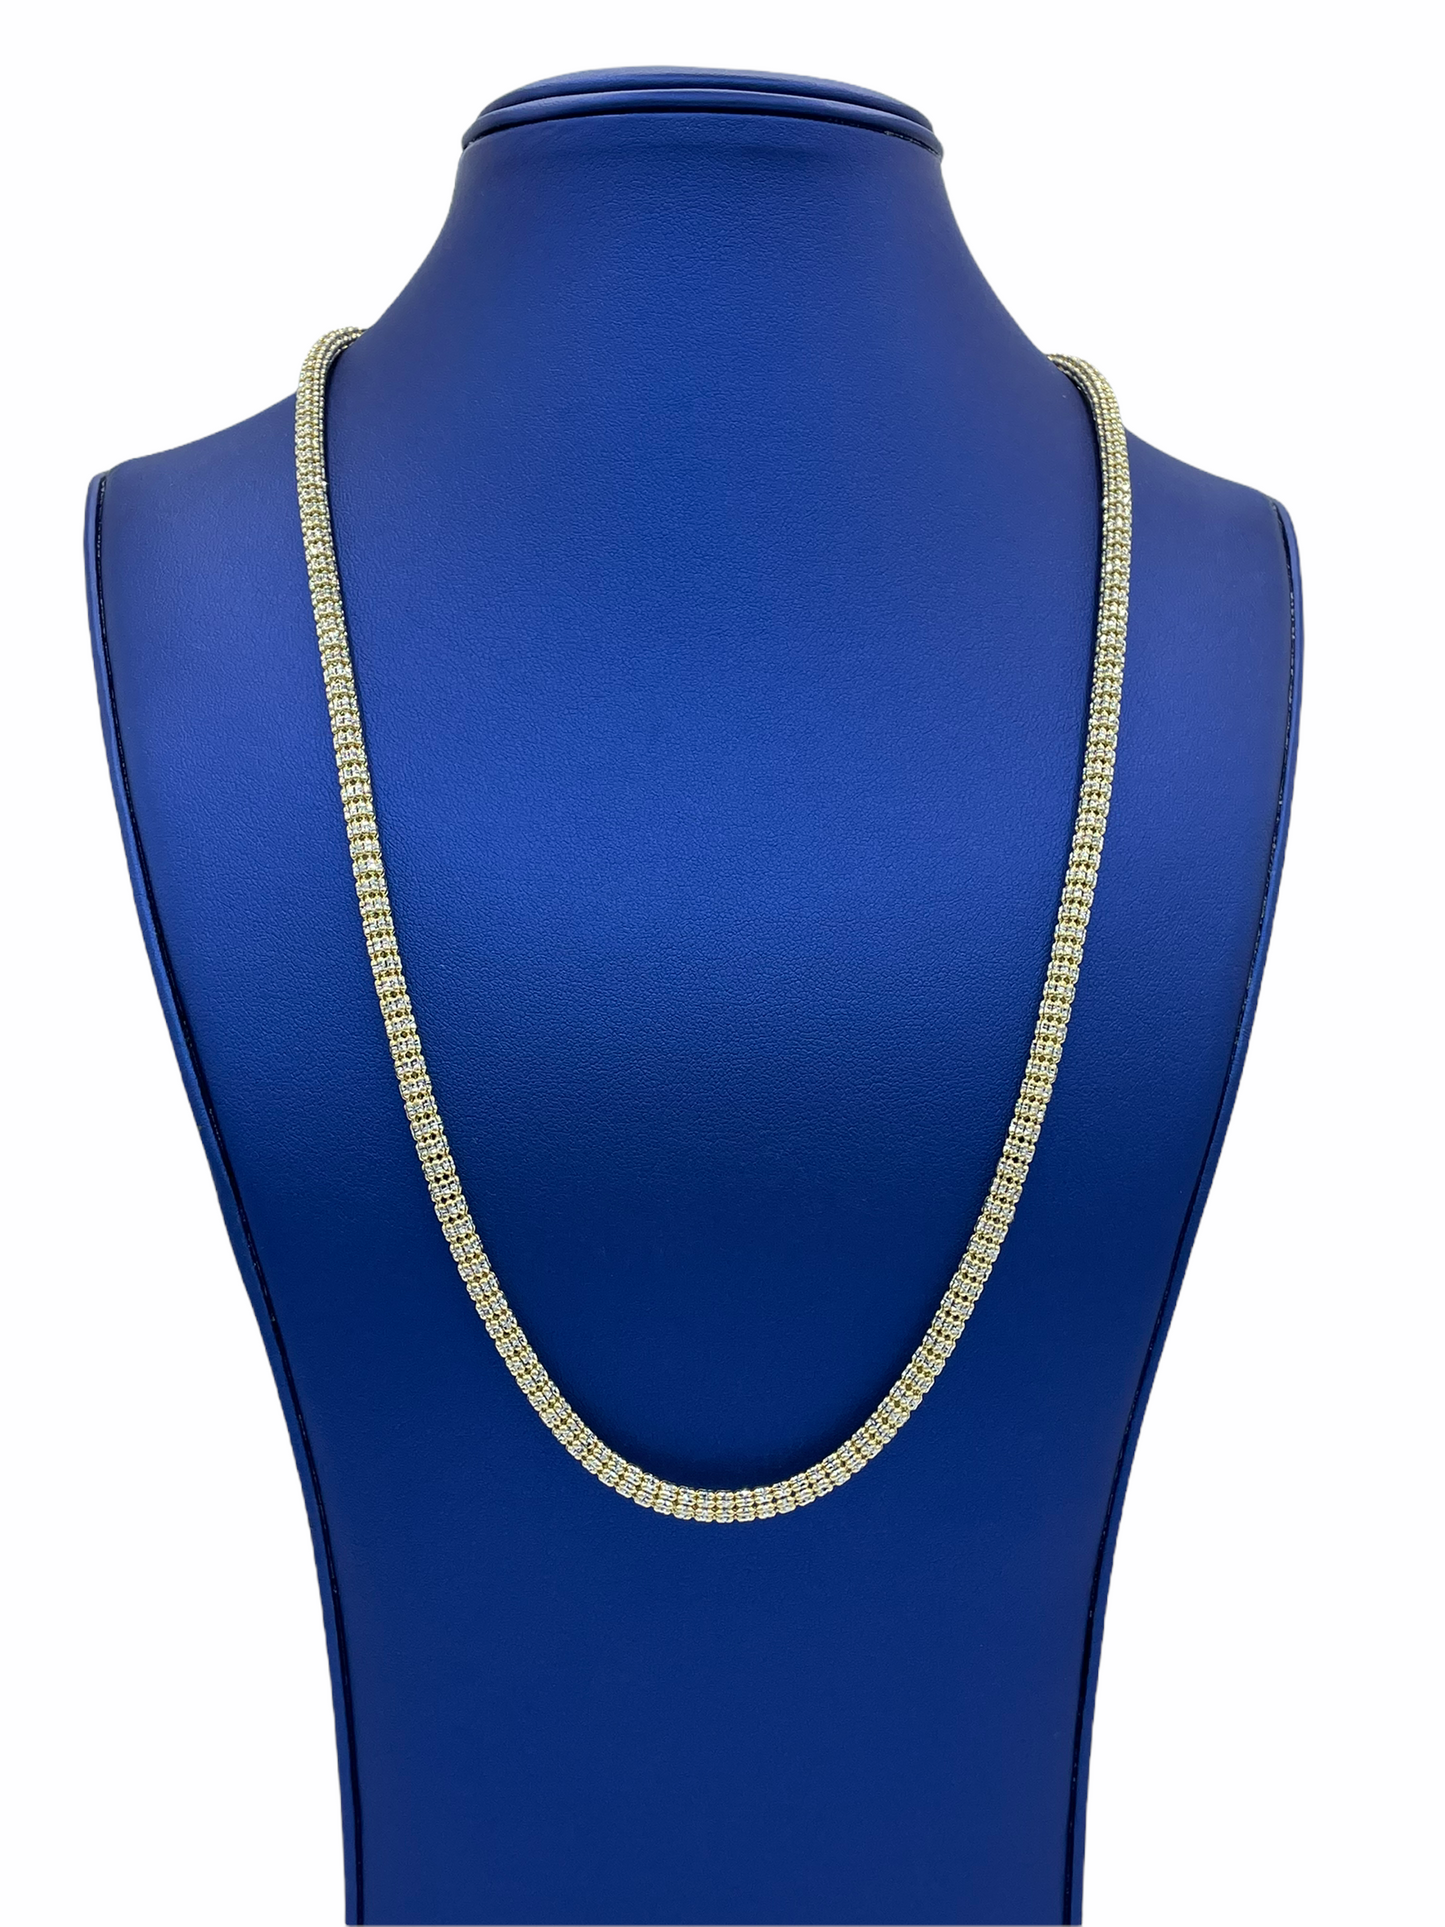 14K Iced Chain  (24”- 4.6 mm)Yellow Gold by GD ™ - Gold Drip Jewelry